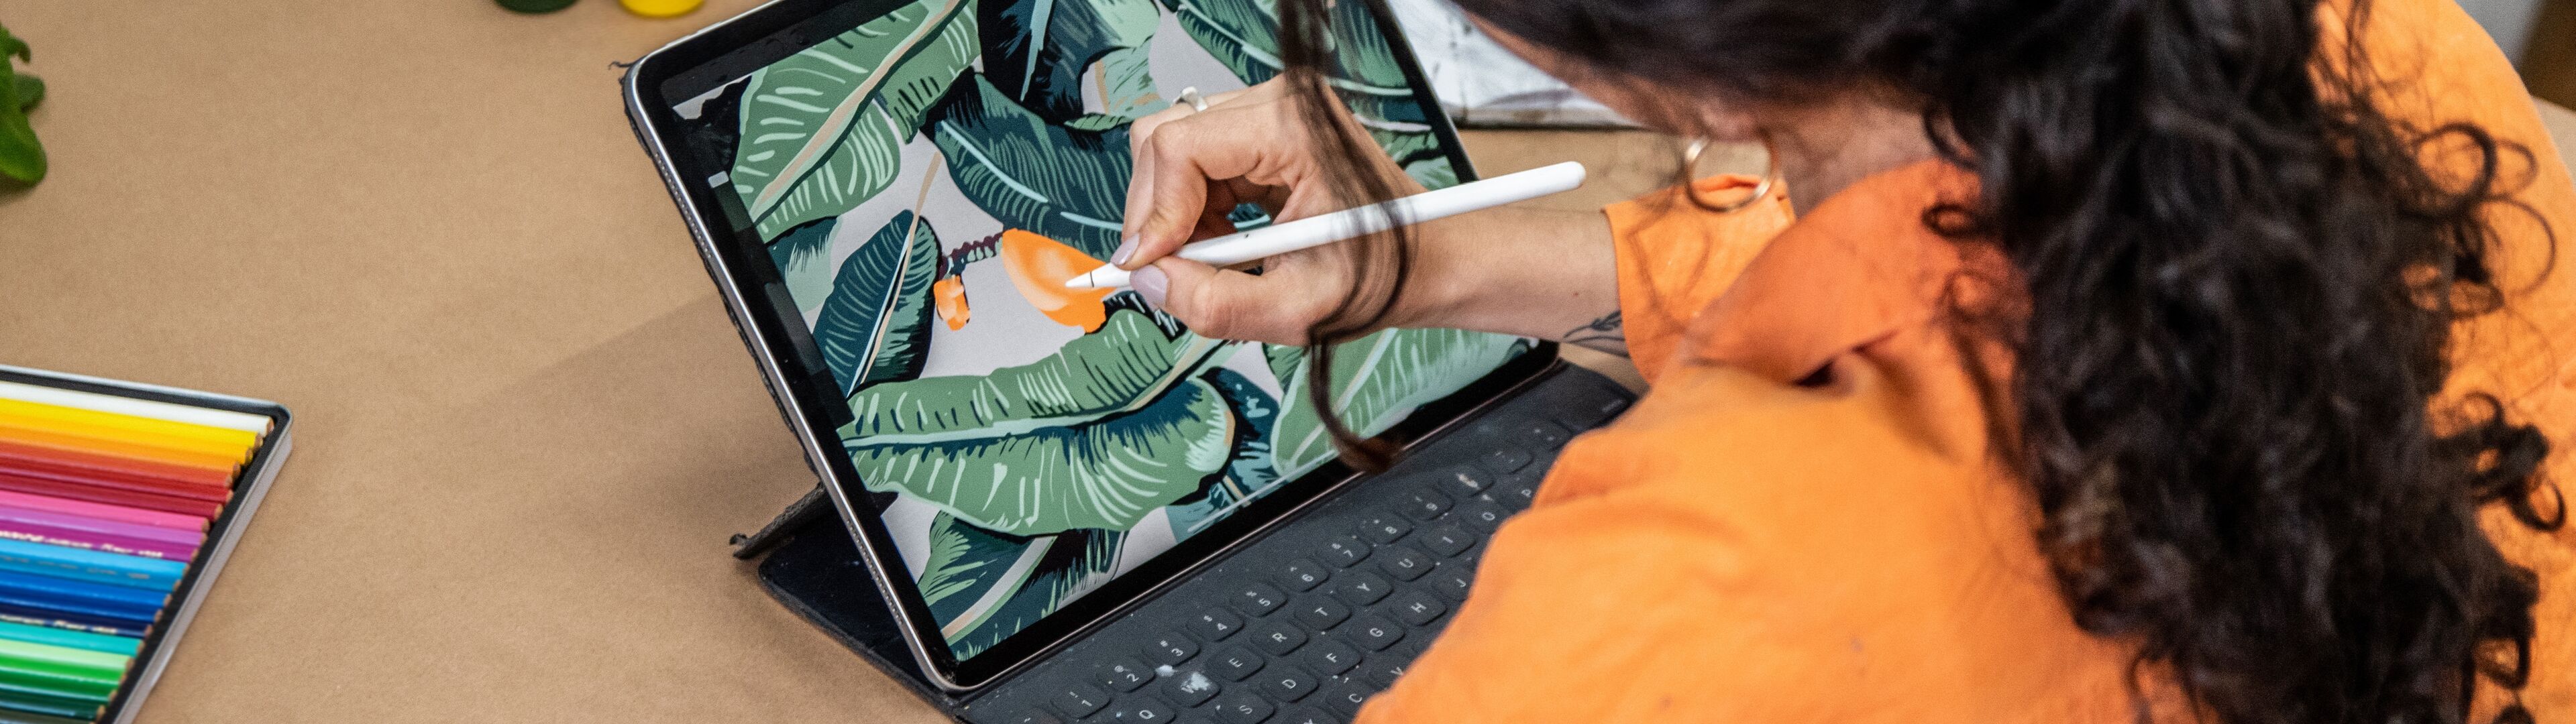 An artist in an orange shirt uses a stylus on a tablet to digitally paint a tropical leaf design.